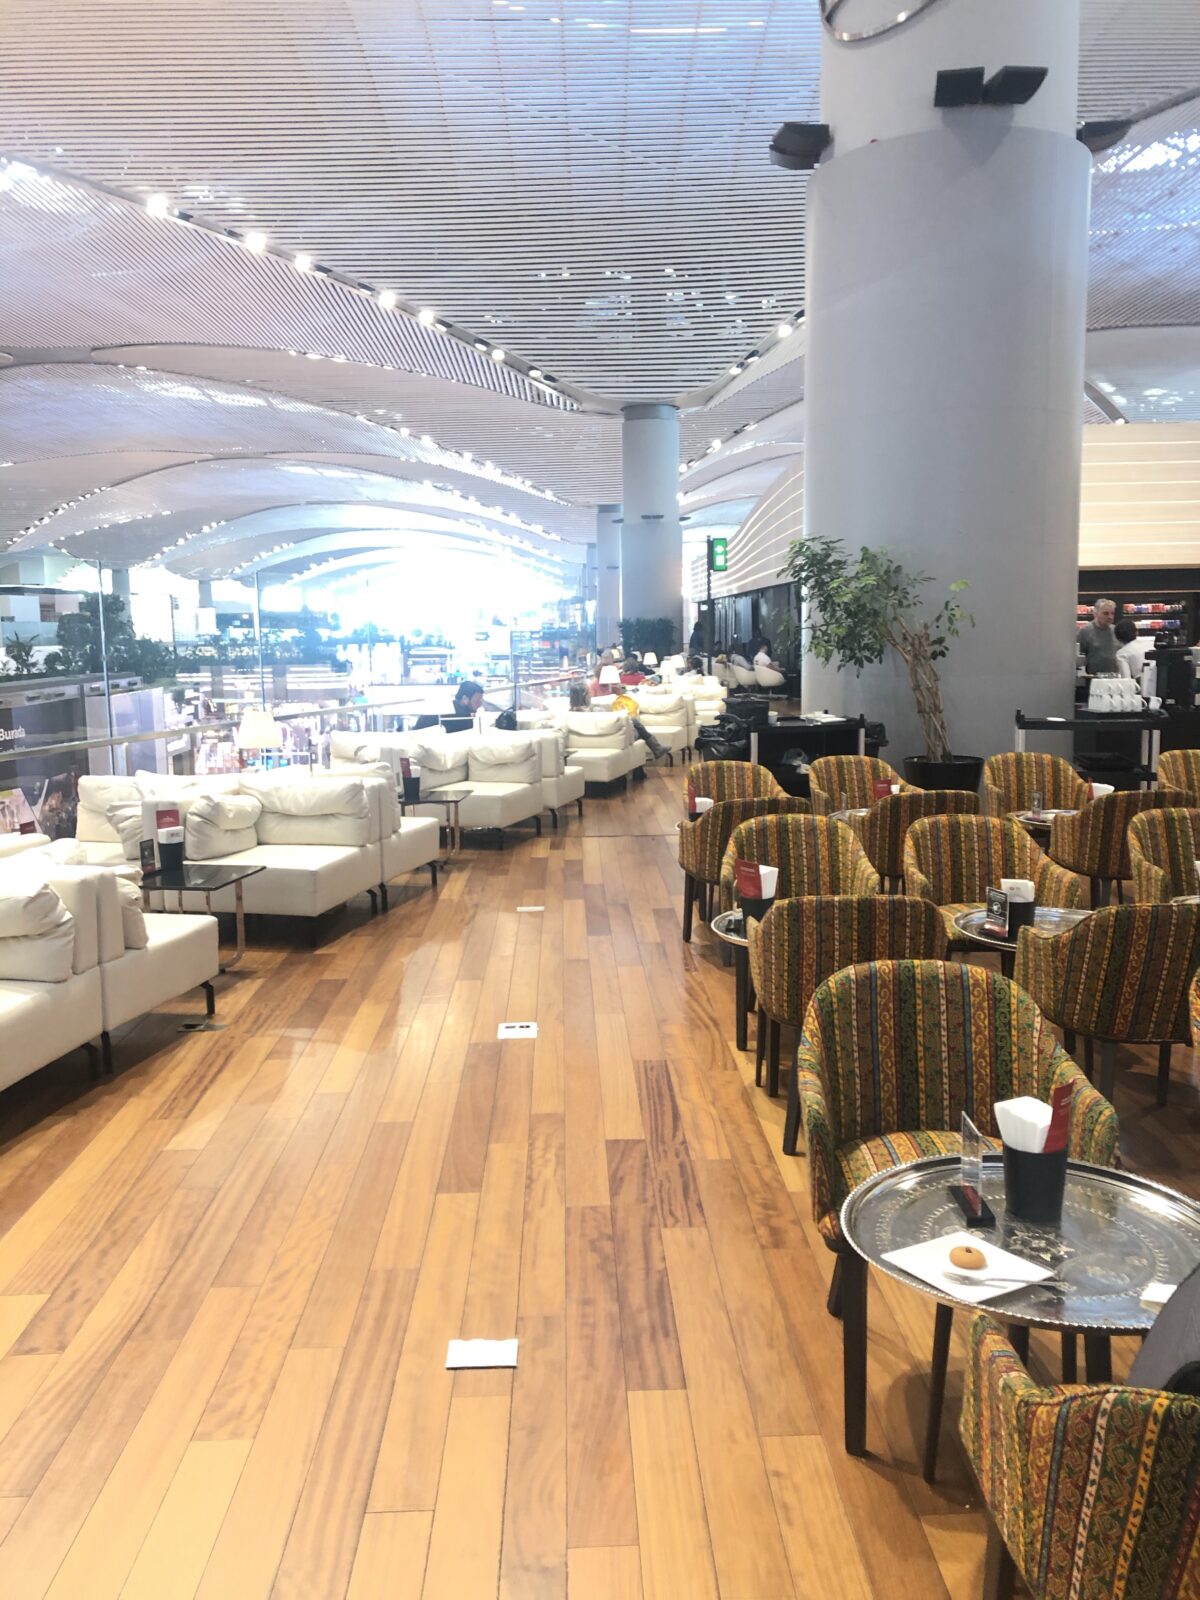 Review: Turkish Airlines Lounge Miles&Smiles in Istanbul